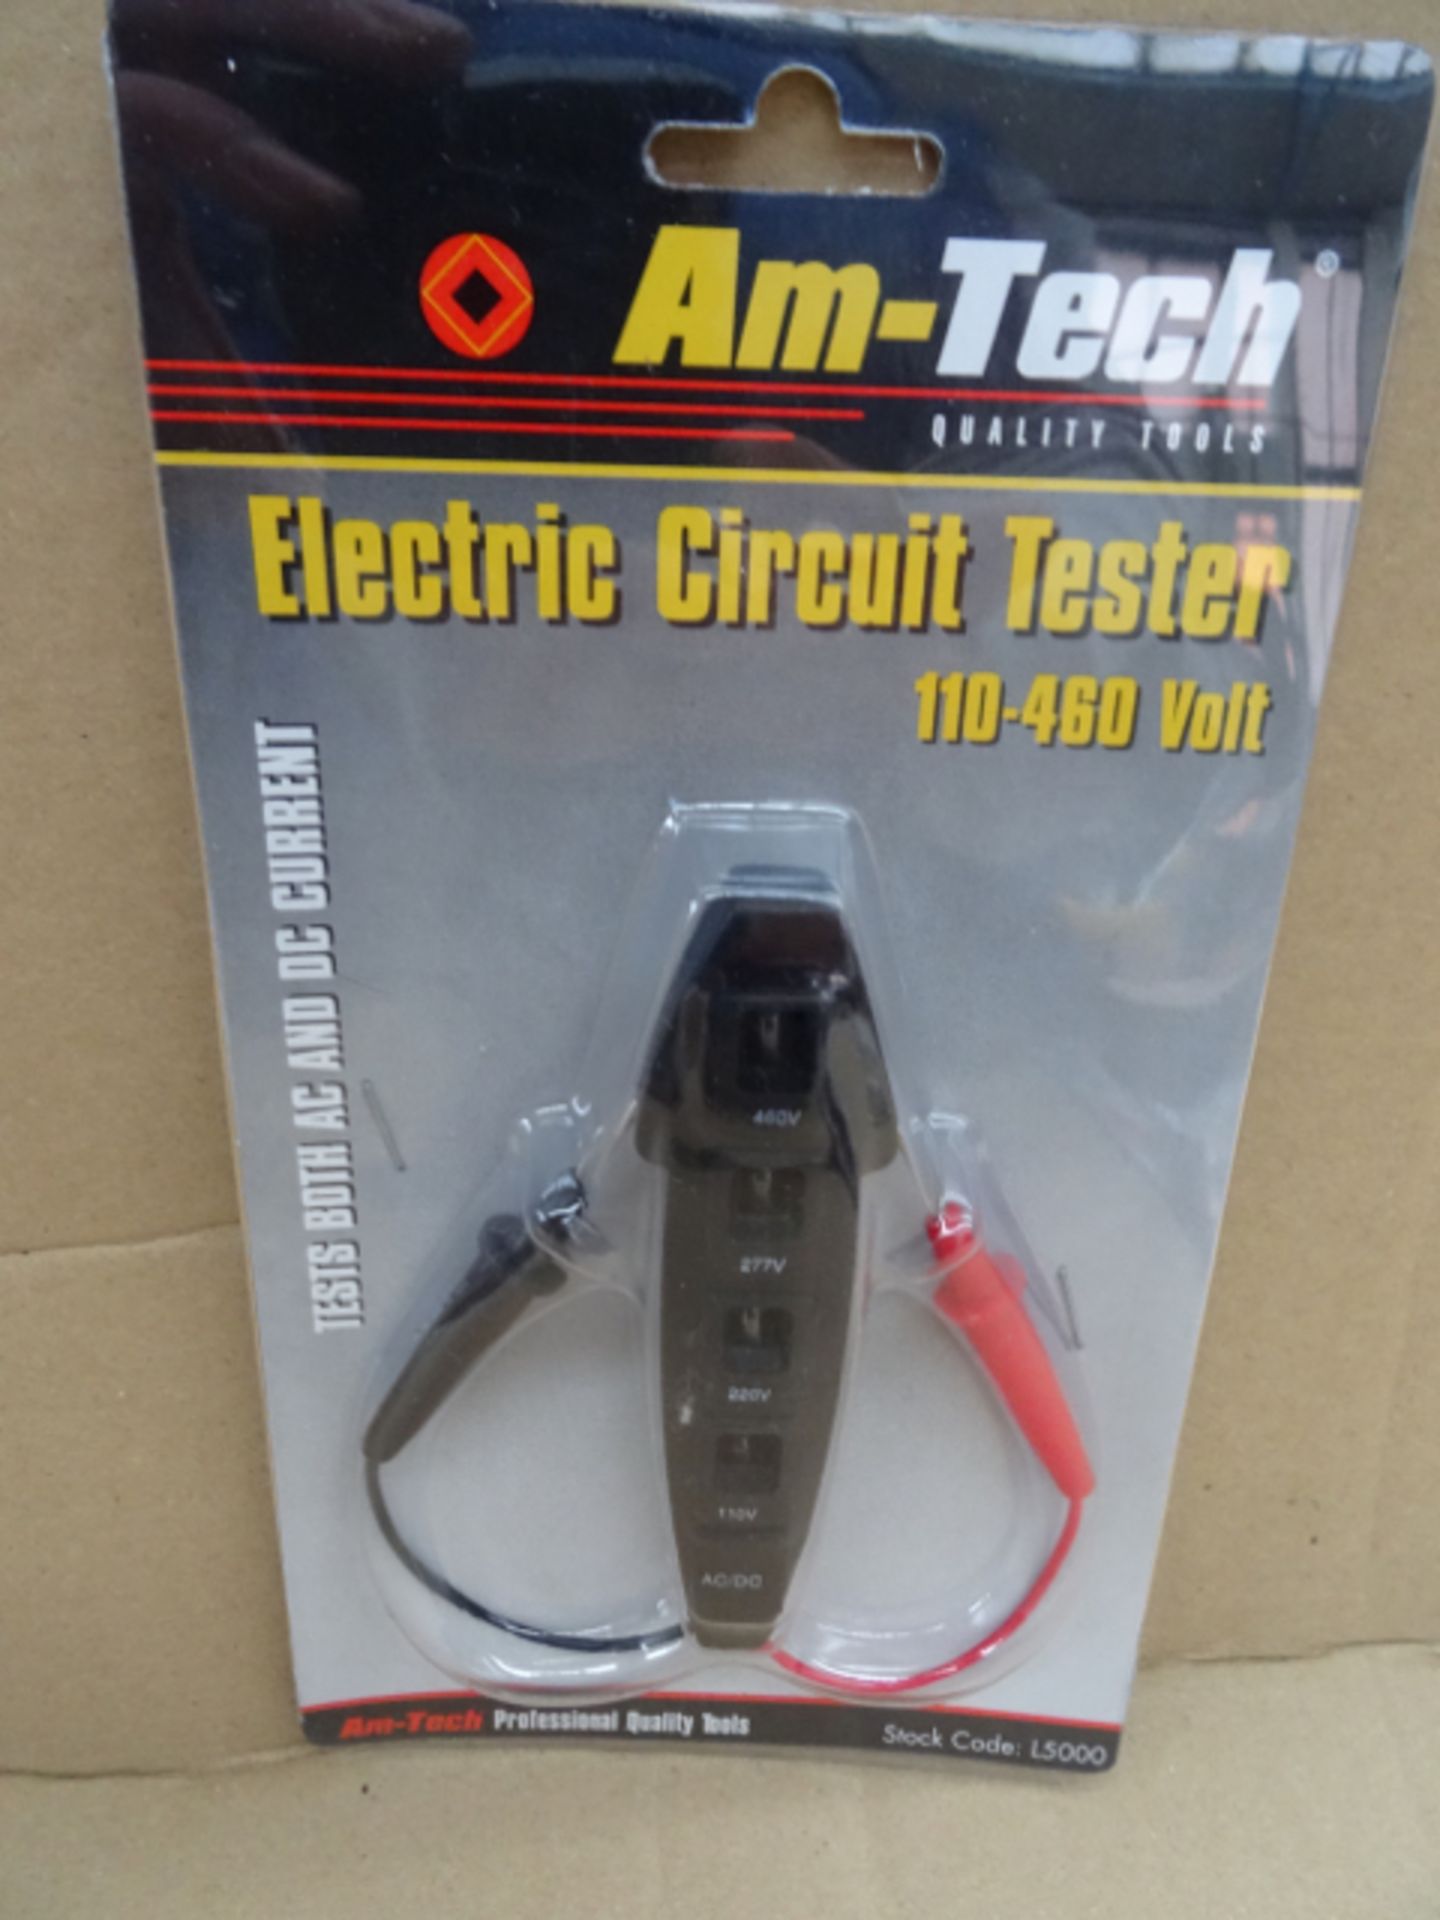 48 x Am-Tech Quality Tools. Electric Circuit Tester. 110-460 Volt. Tests both AC and DC Current. - Image 2 of 3